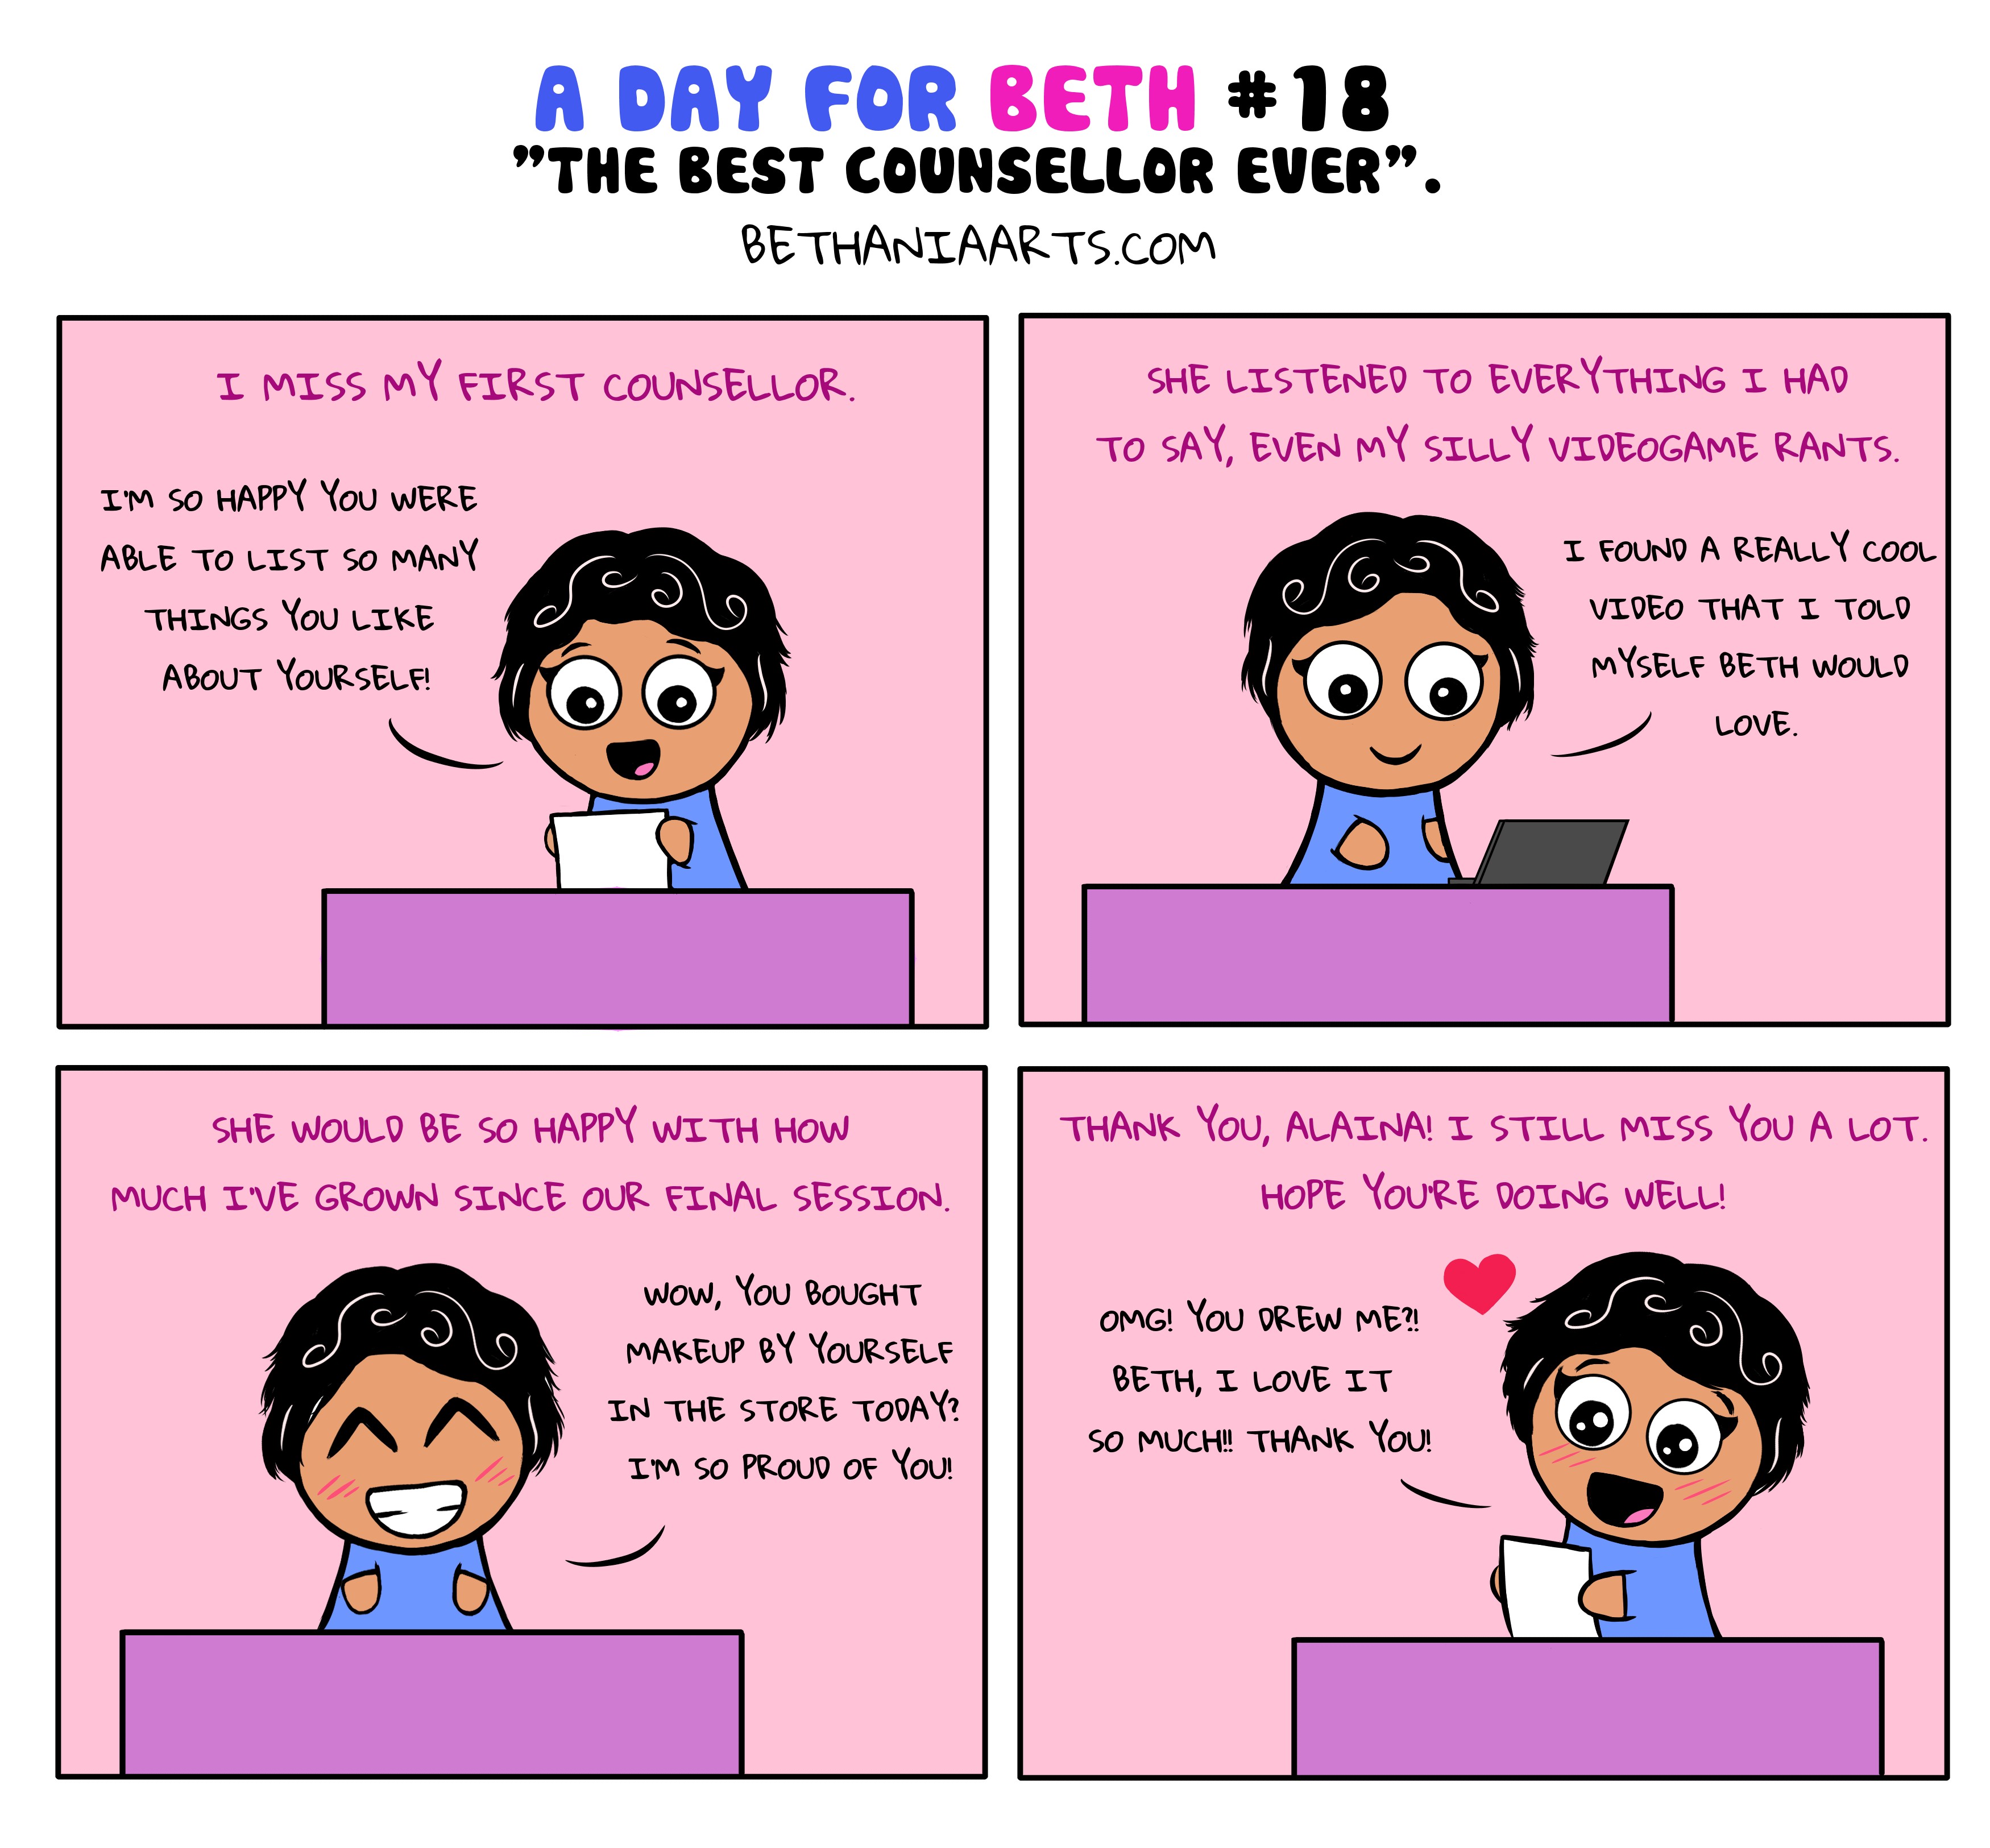 A Day For Beth #18: “The Best Counsellor Ever”.